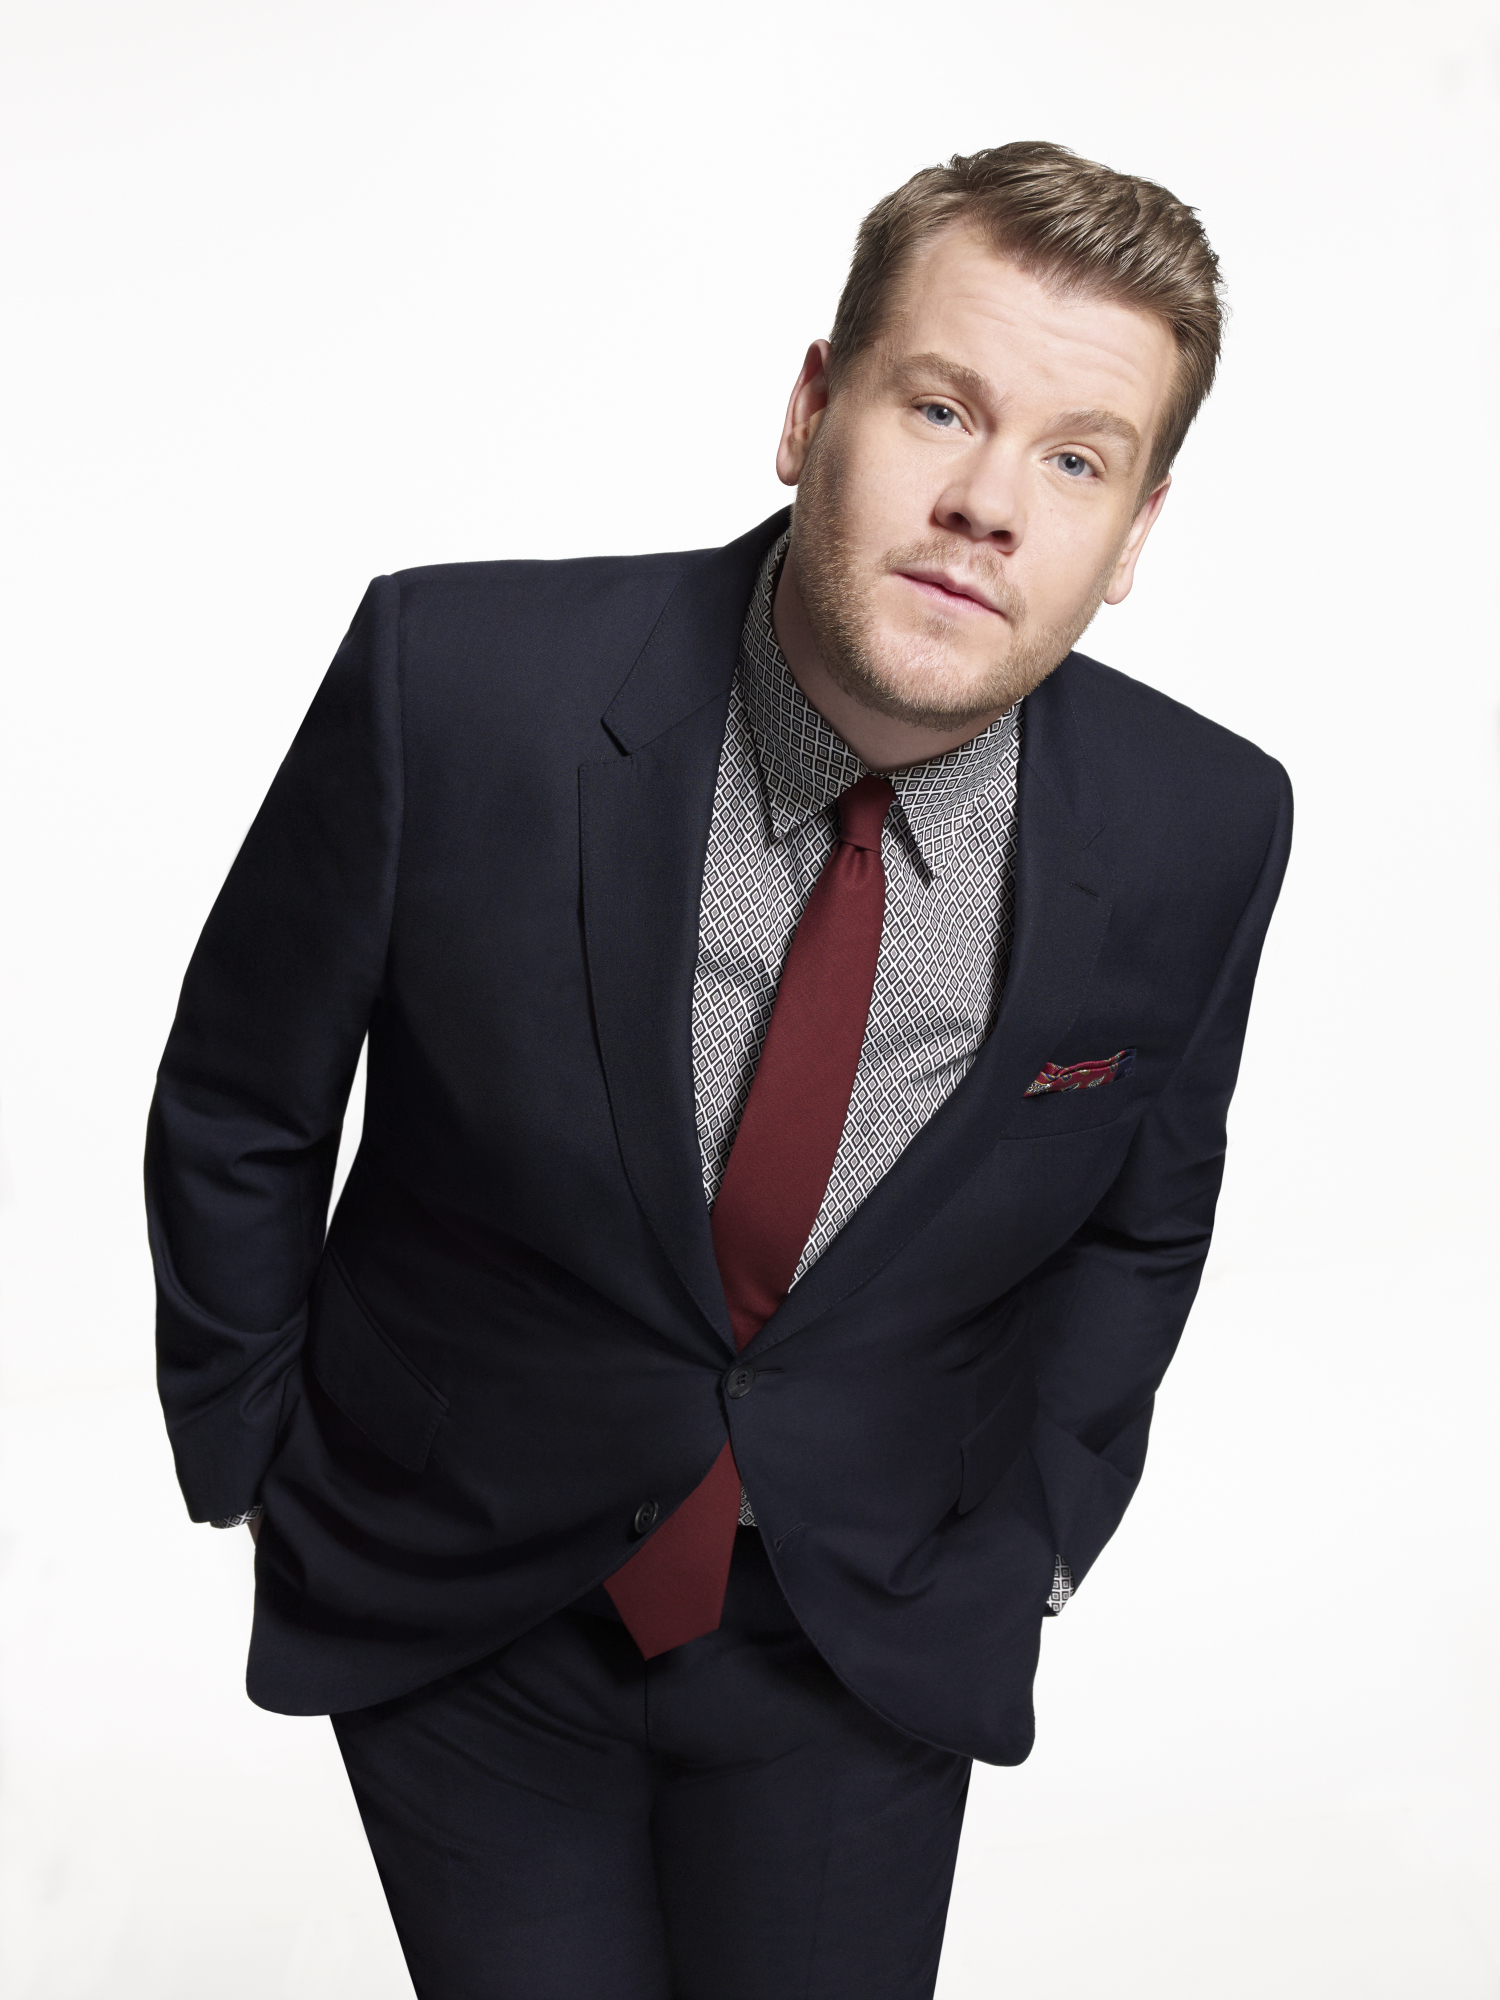 "The Late Late Show with James Corden" -  James Corden takes over as host of THE LATE LATE SHOW on Monday, March 23 (12:37 - 1:37 AM, ET/PT) on the CBS Television Network. Photo: Art Streiber/CBS ÃÂ©2015 CBS Broadcasting, Inc. All Rights Reserved